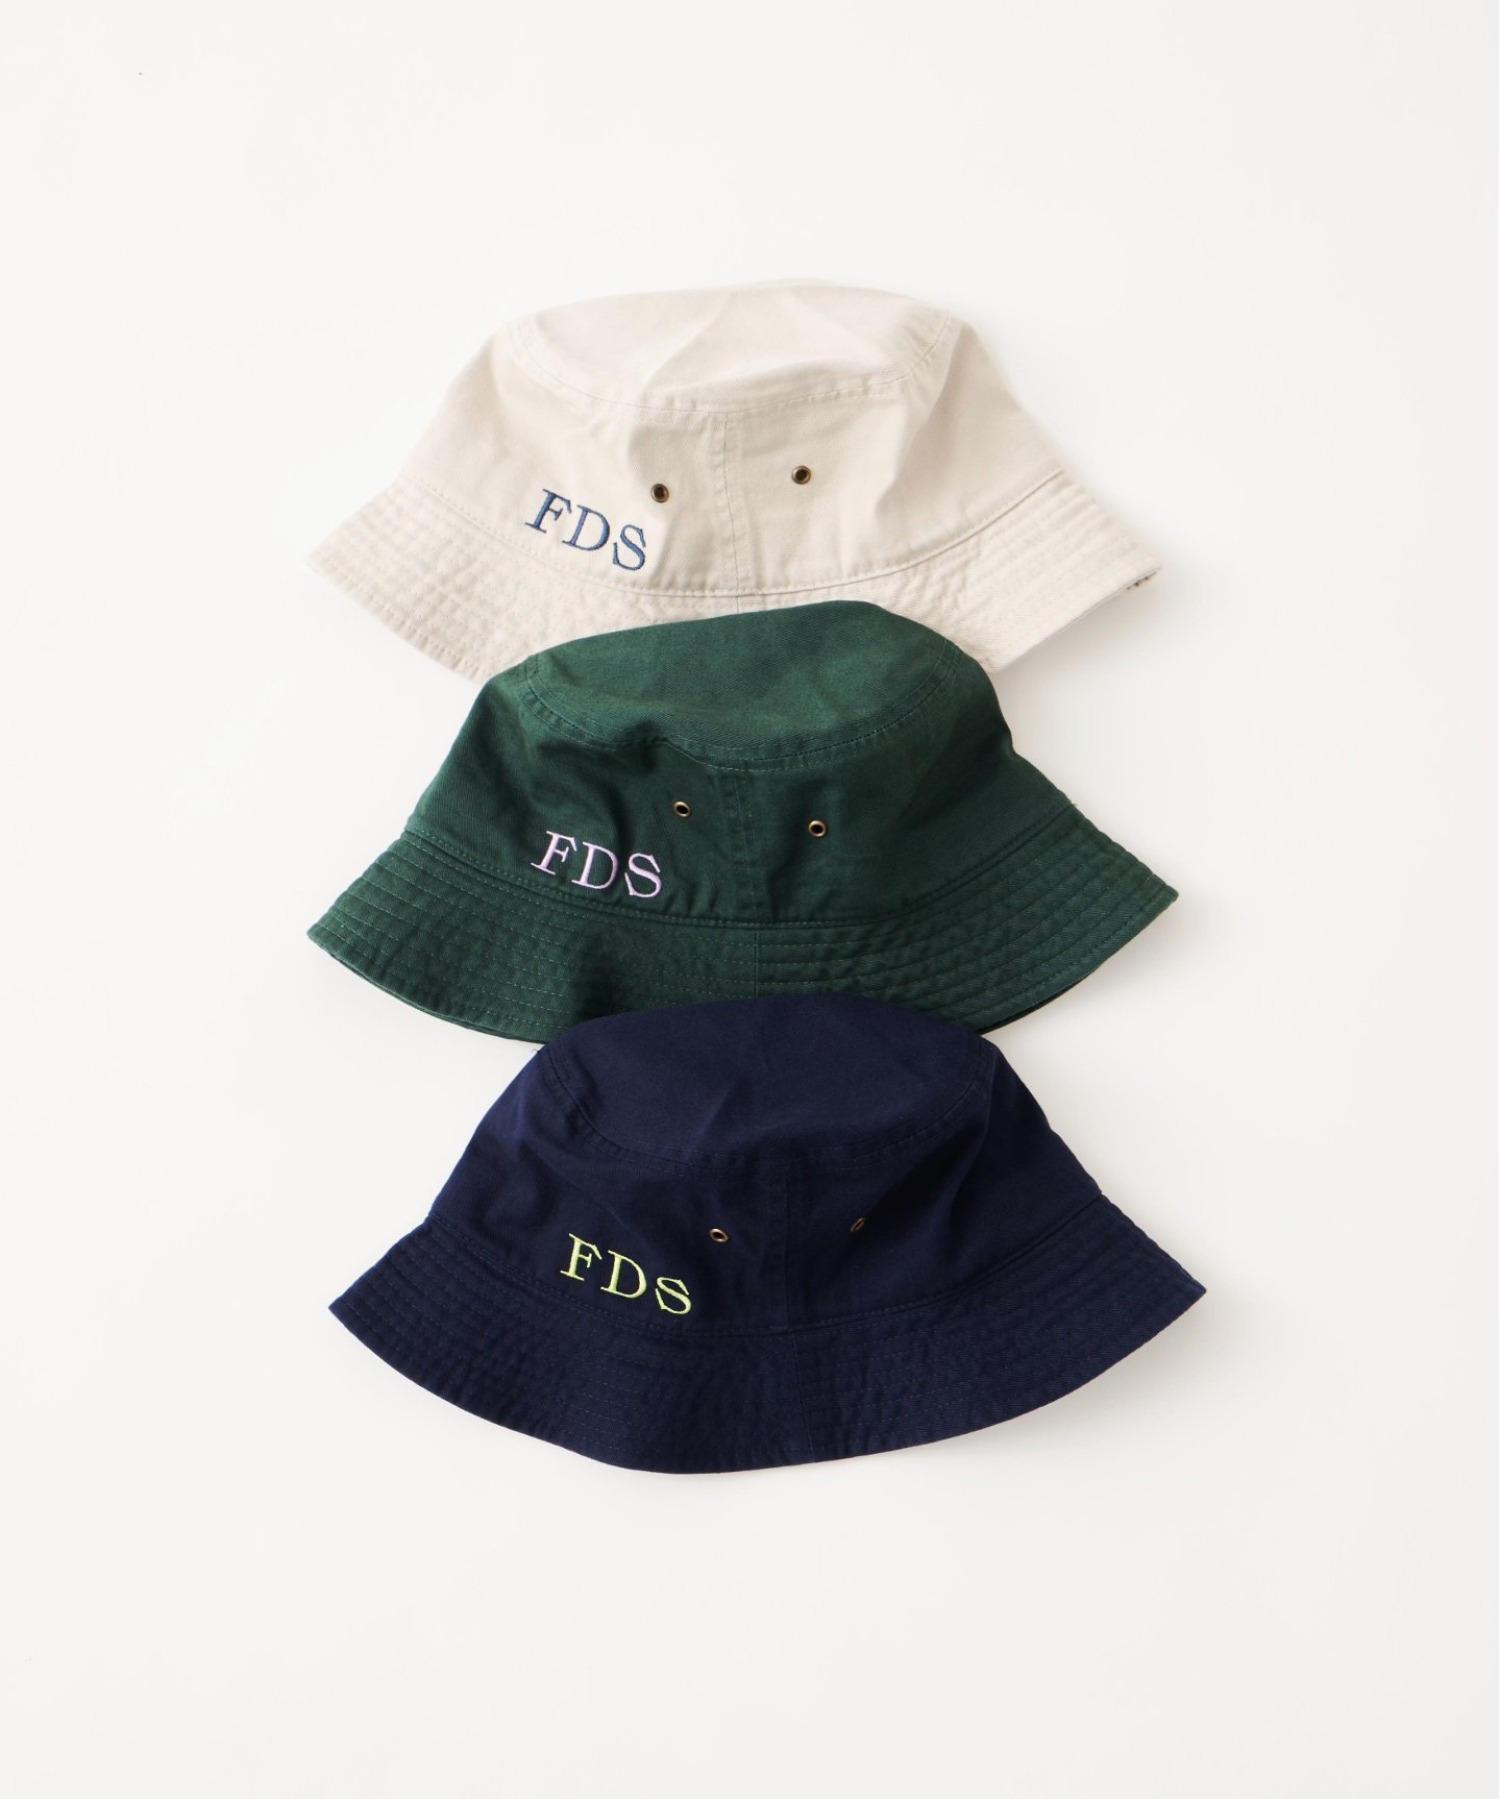 417 EDIFICE FAMOUS DEPARTMENT STORE 超特価 【56%OFF!】 デパートメント HAT ストア フェイマス